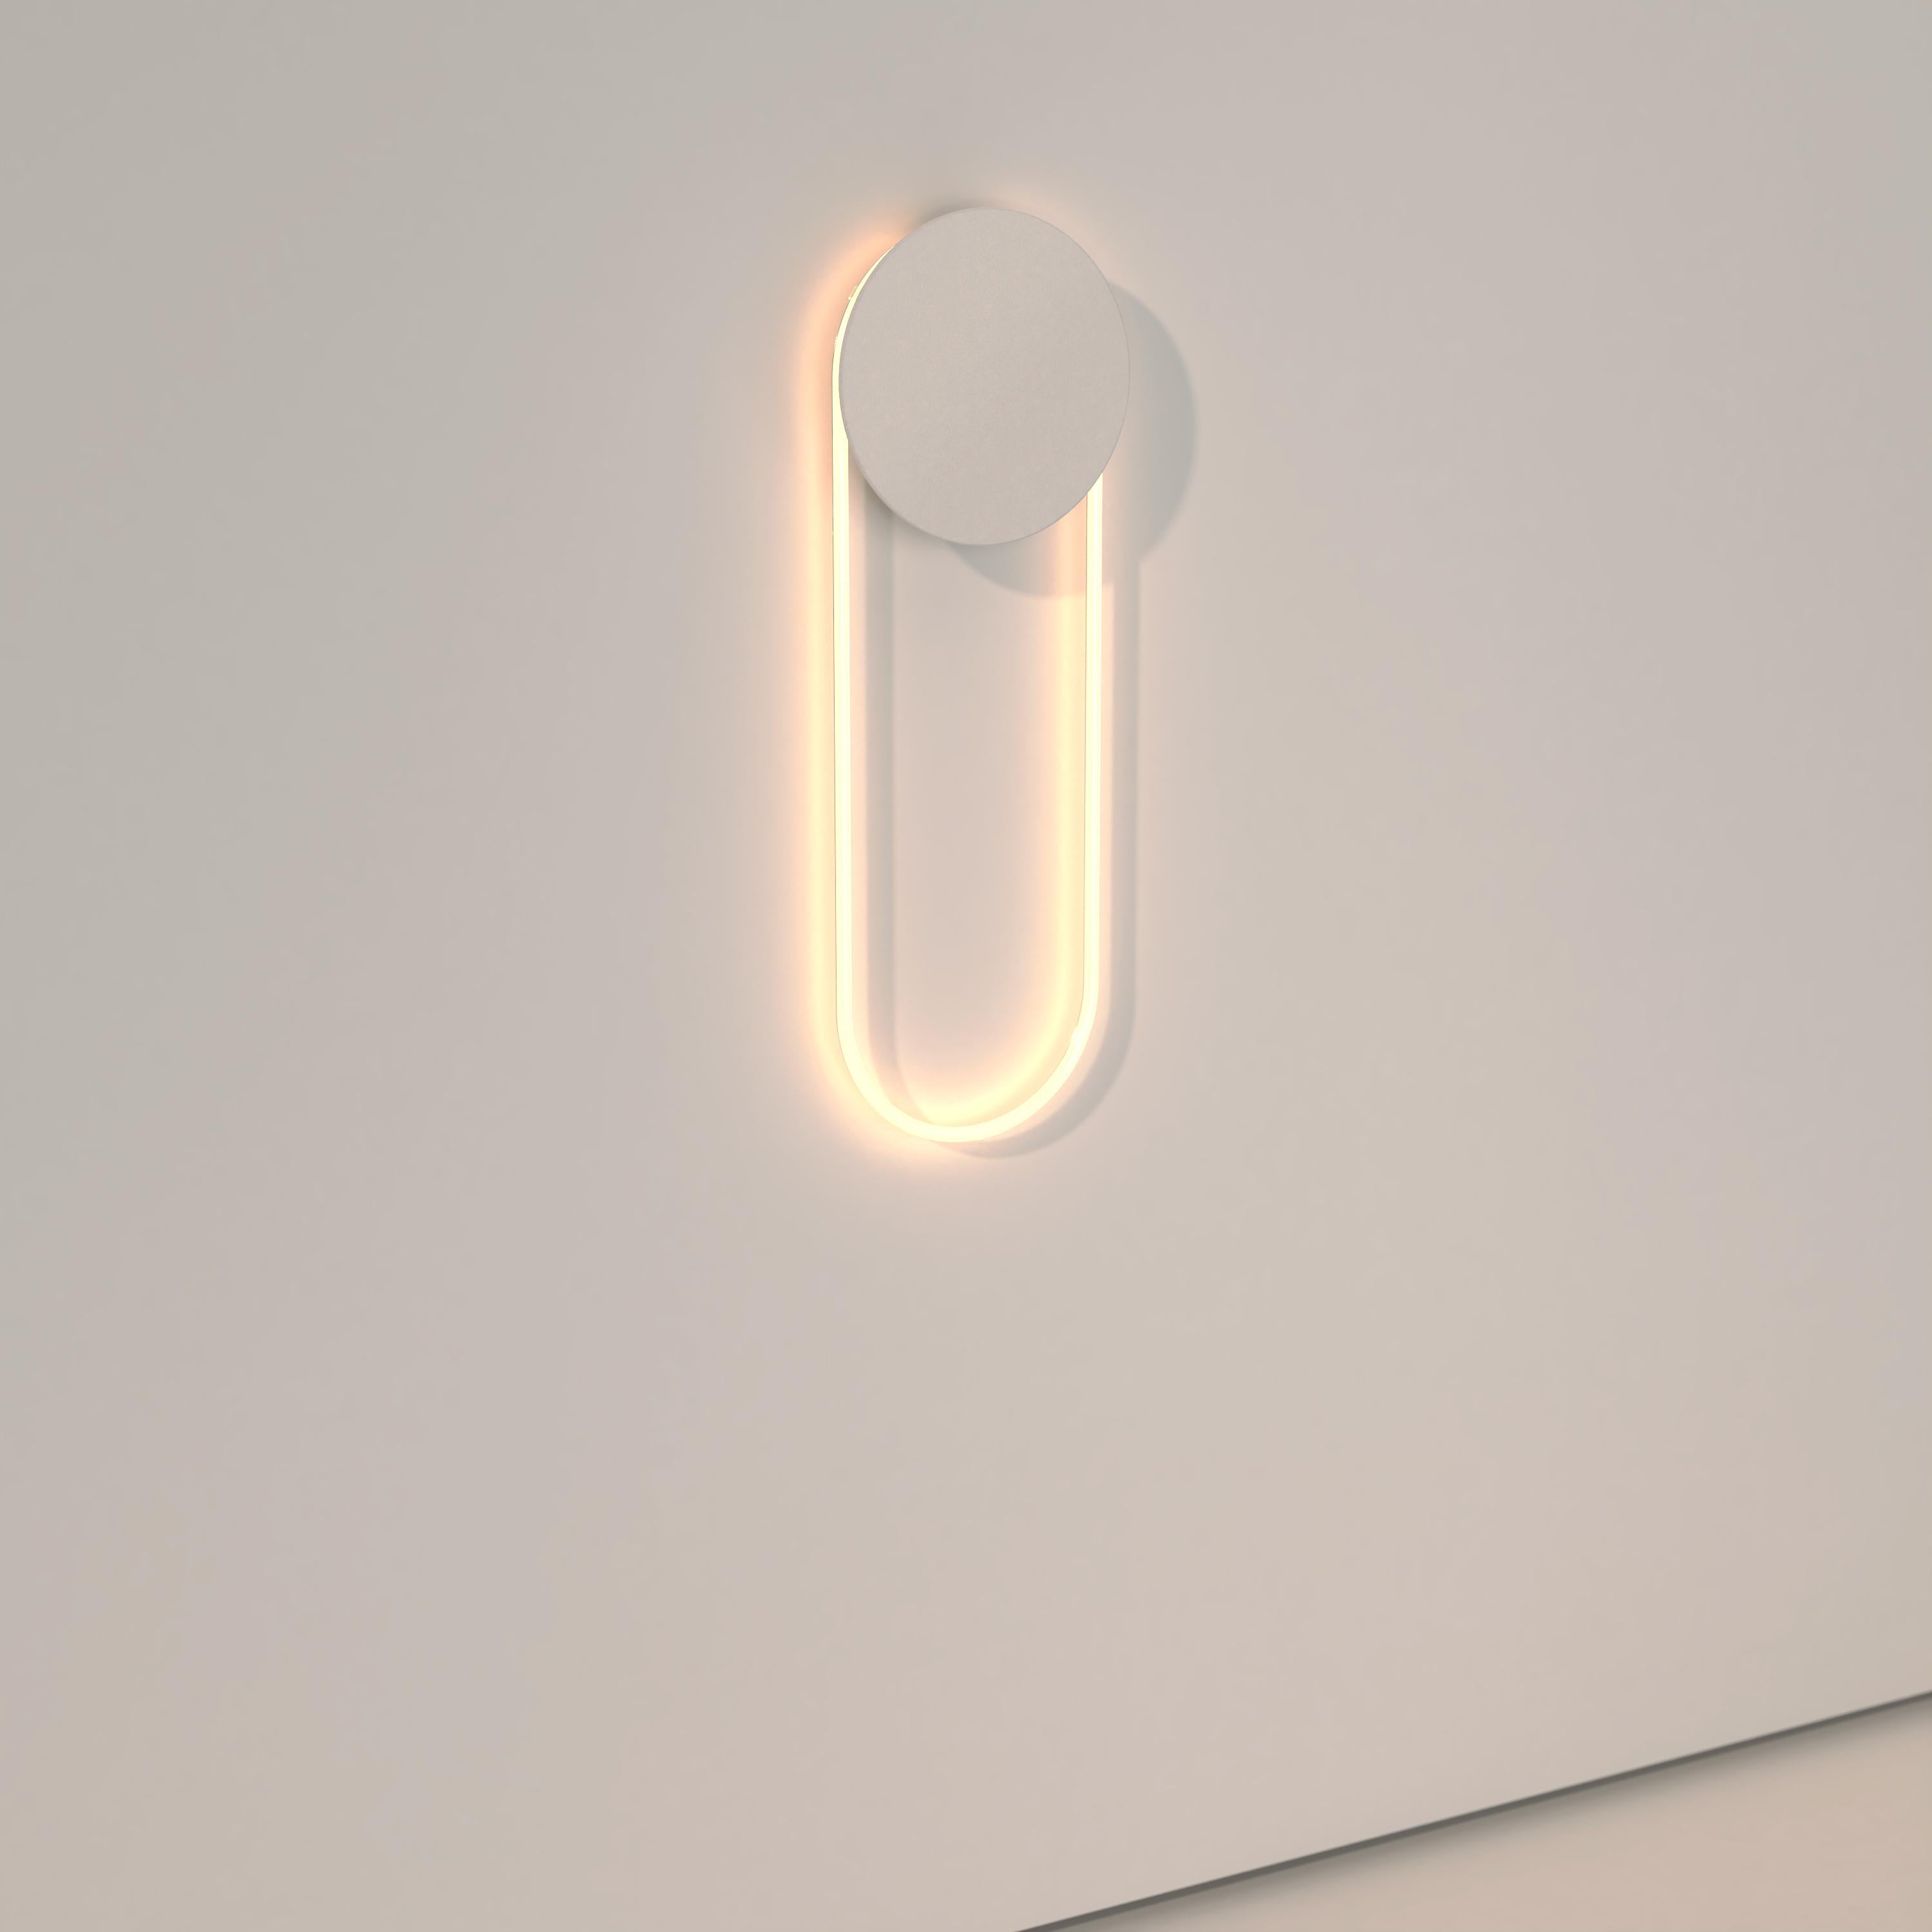 The Ra Wall is a modern and hypnotic wall sconce lighting made with a cold cathode neon and a circular disc available in diverse finishes.

RA Wall participates in its surroundings by playing with contrasts, shadows and reflections. The circular